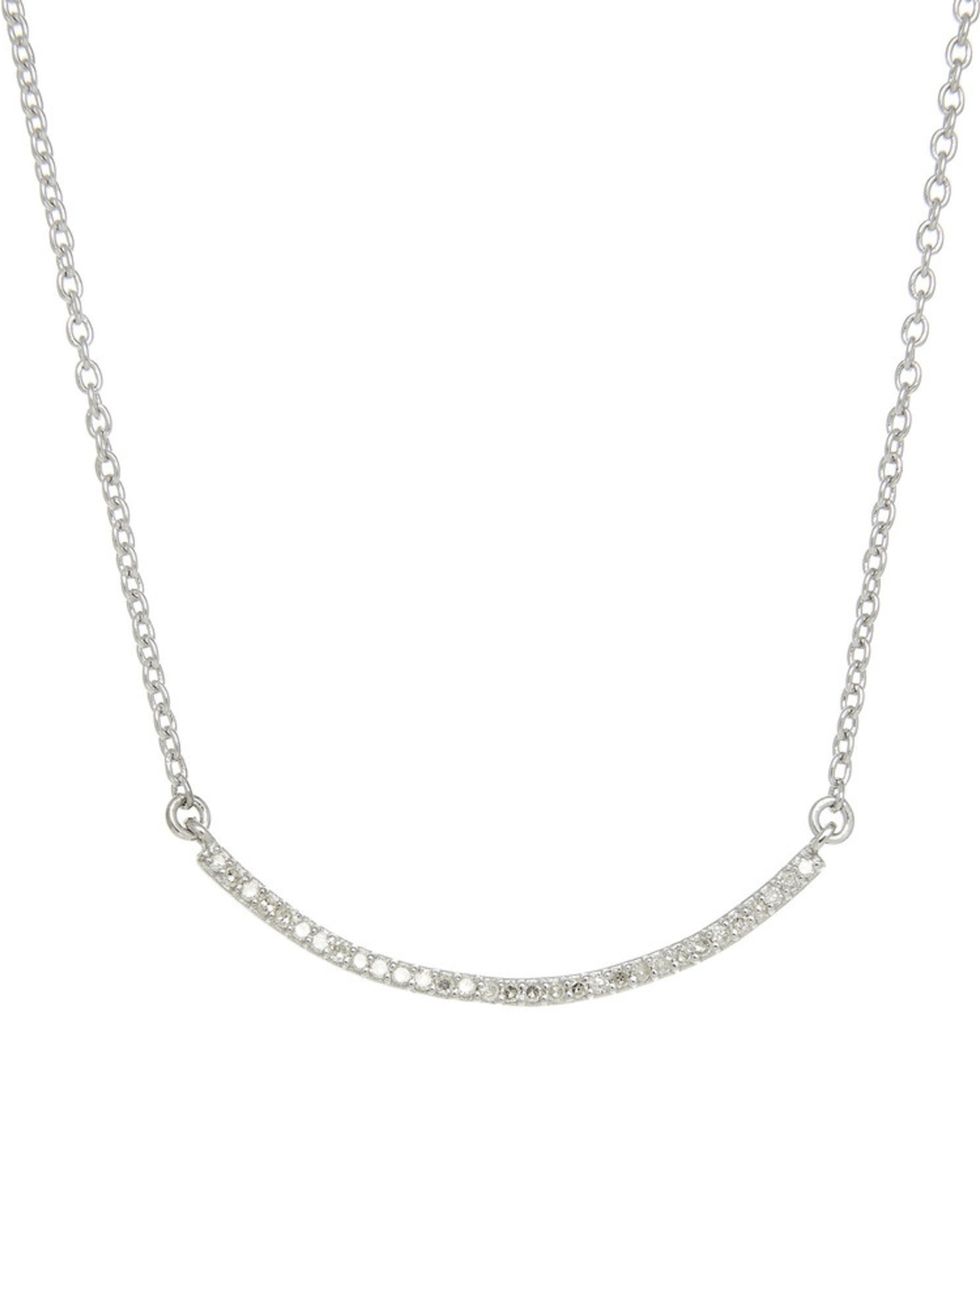 <p>Bar necklace, £140, <a href="http://carrieelizabeth.co.uk/products/diamond-pave-bar-necklace-1" target="_blank">Carrie Elizabeth Jewellery</a></p>